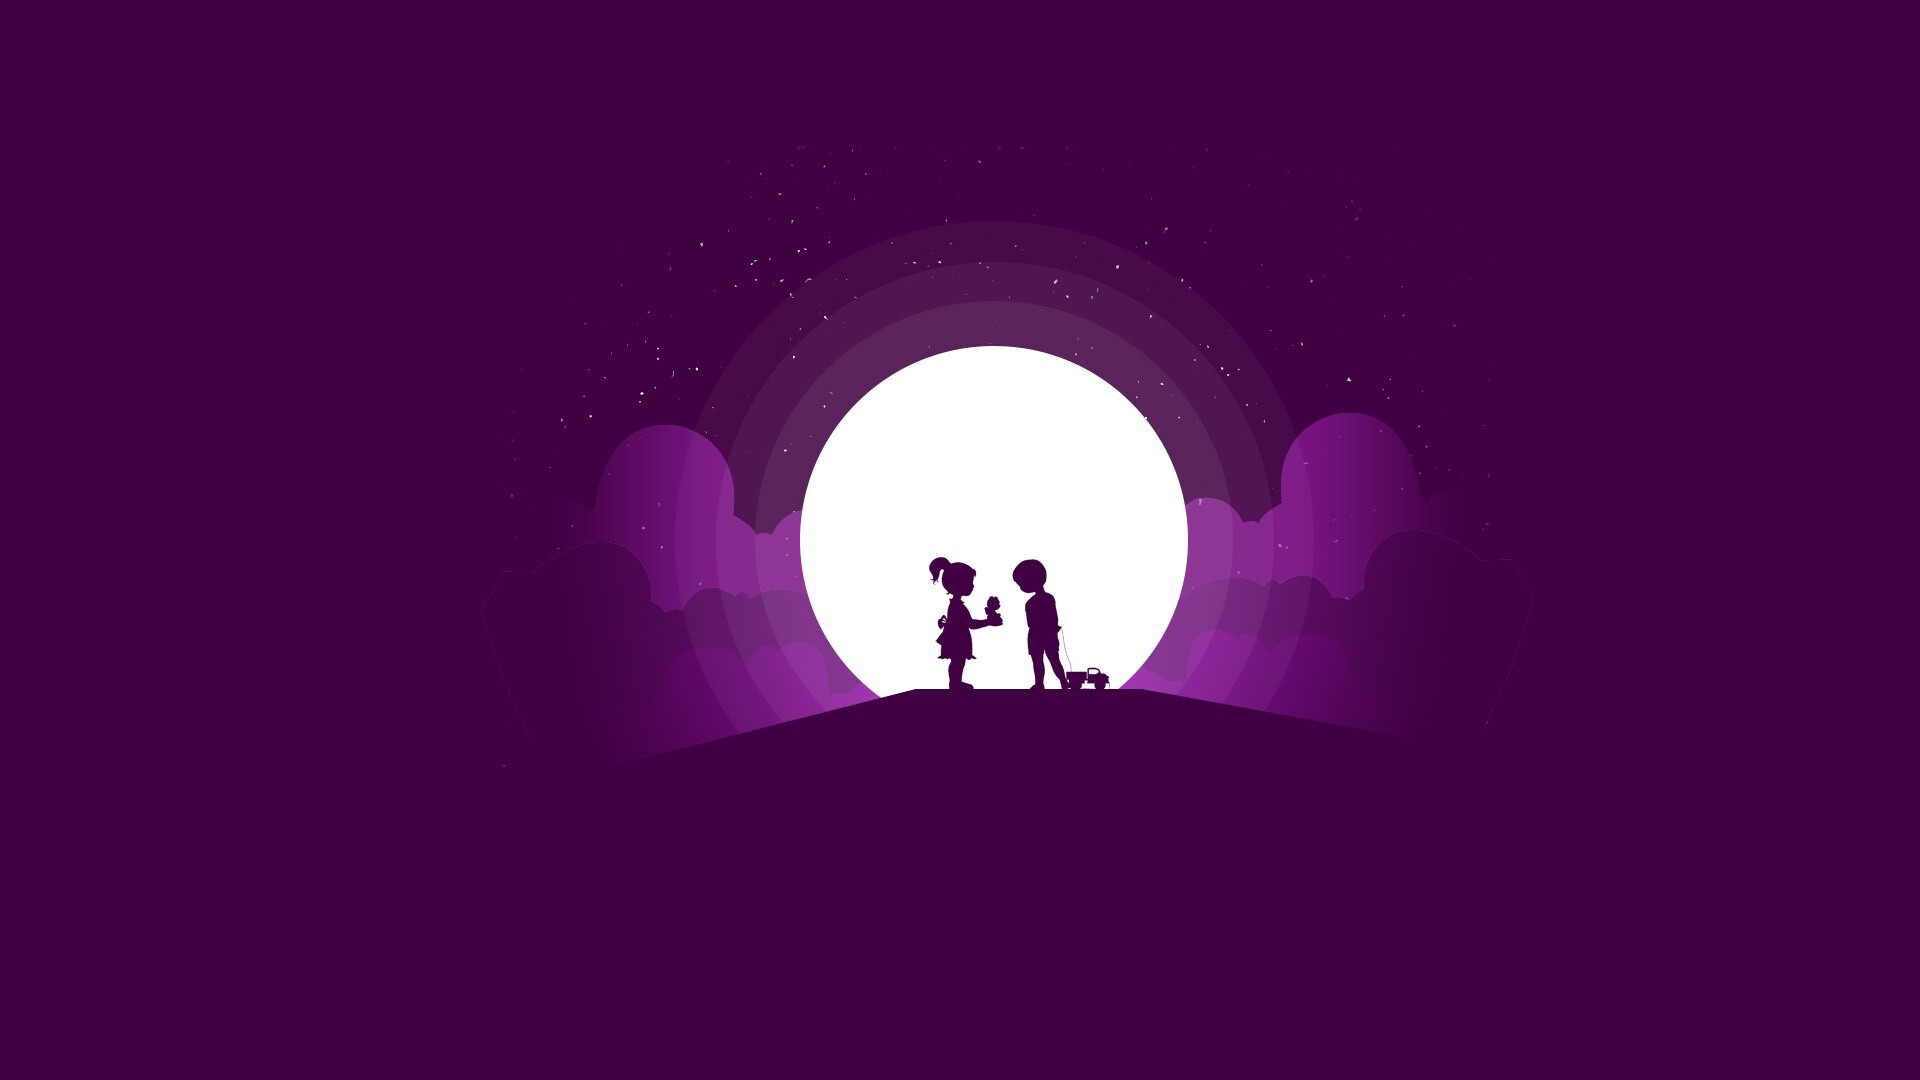 Girly: Kids, Boy and girl silhouette, Big moon, Astronomical object. 1920x1080 Full HD Background.